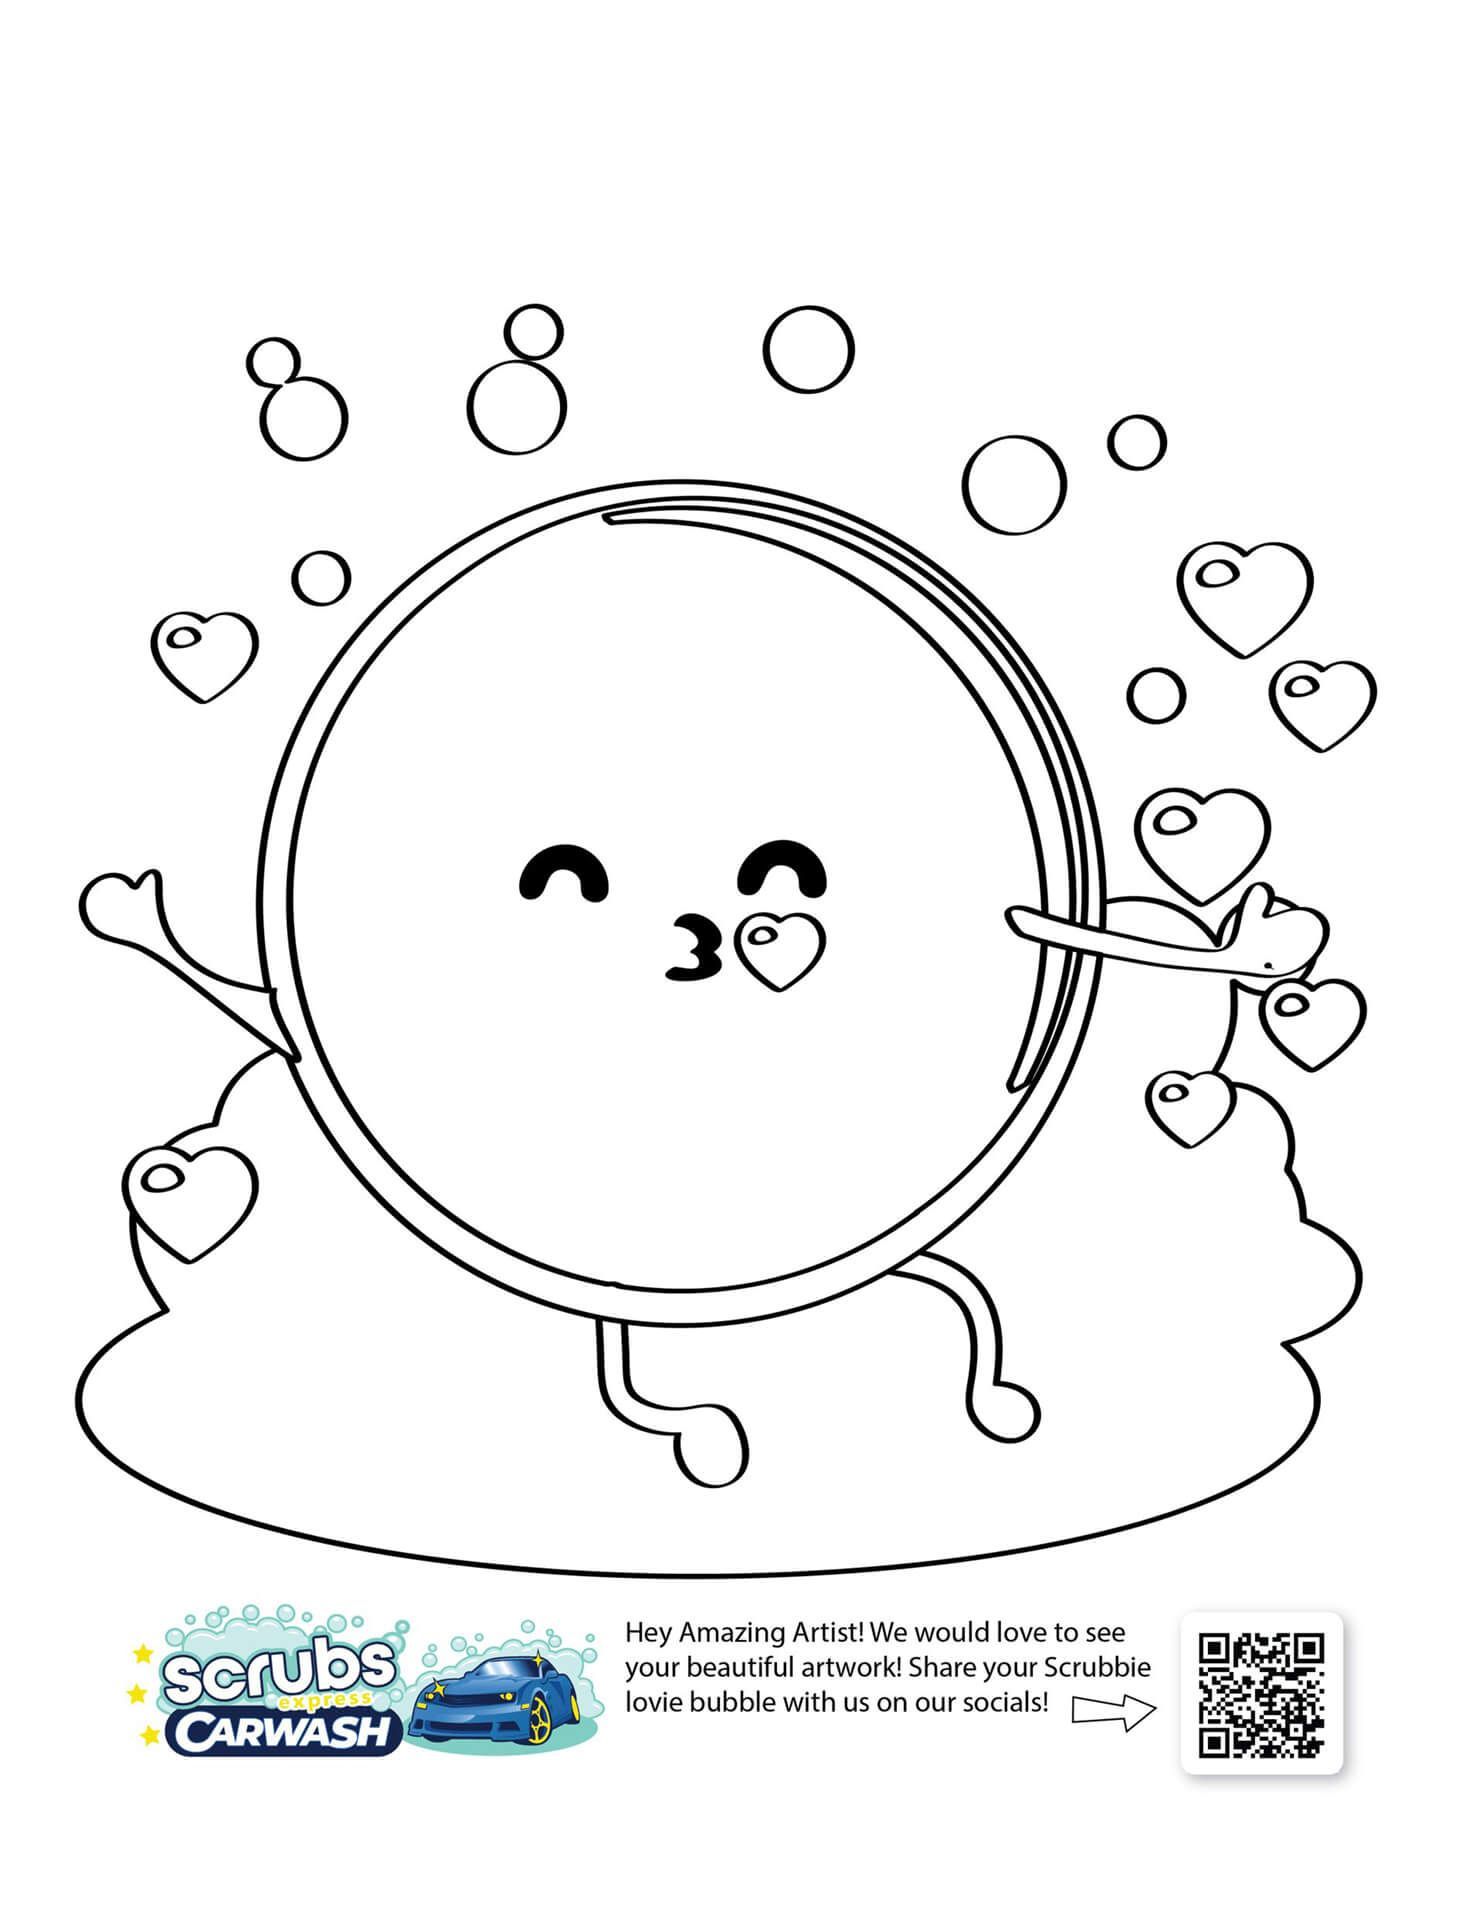 Free download and print coloring pages of Scrubbie Bubble from Scrubs Carwash. A black and white drawing of a soap bubble with hearts around it. Valentine's Day Coloring Page.